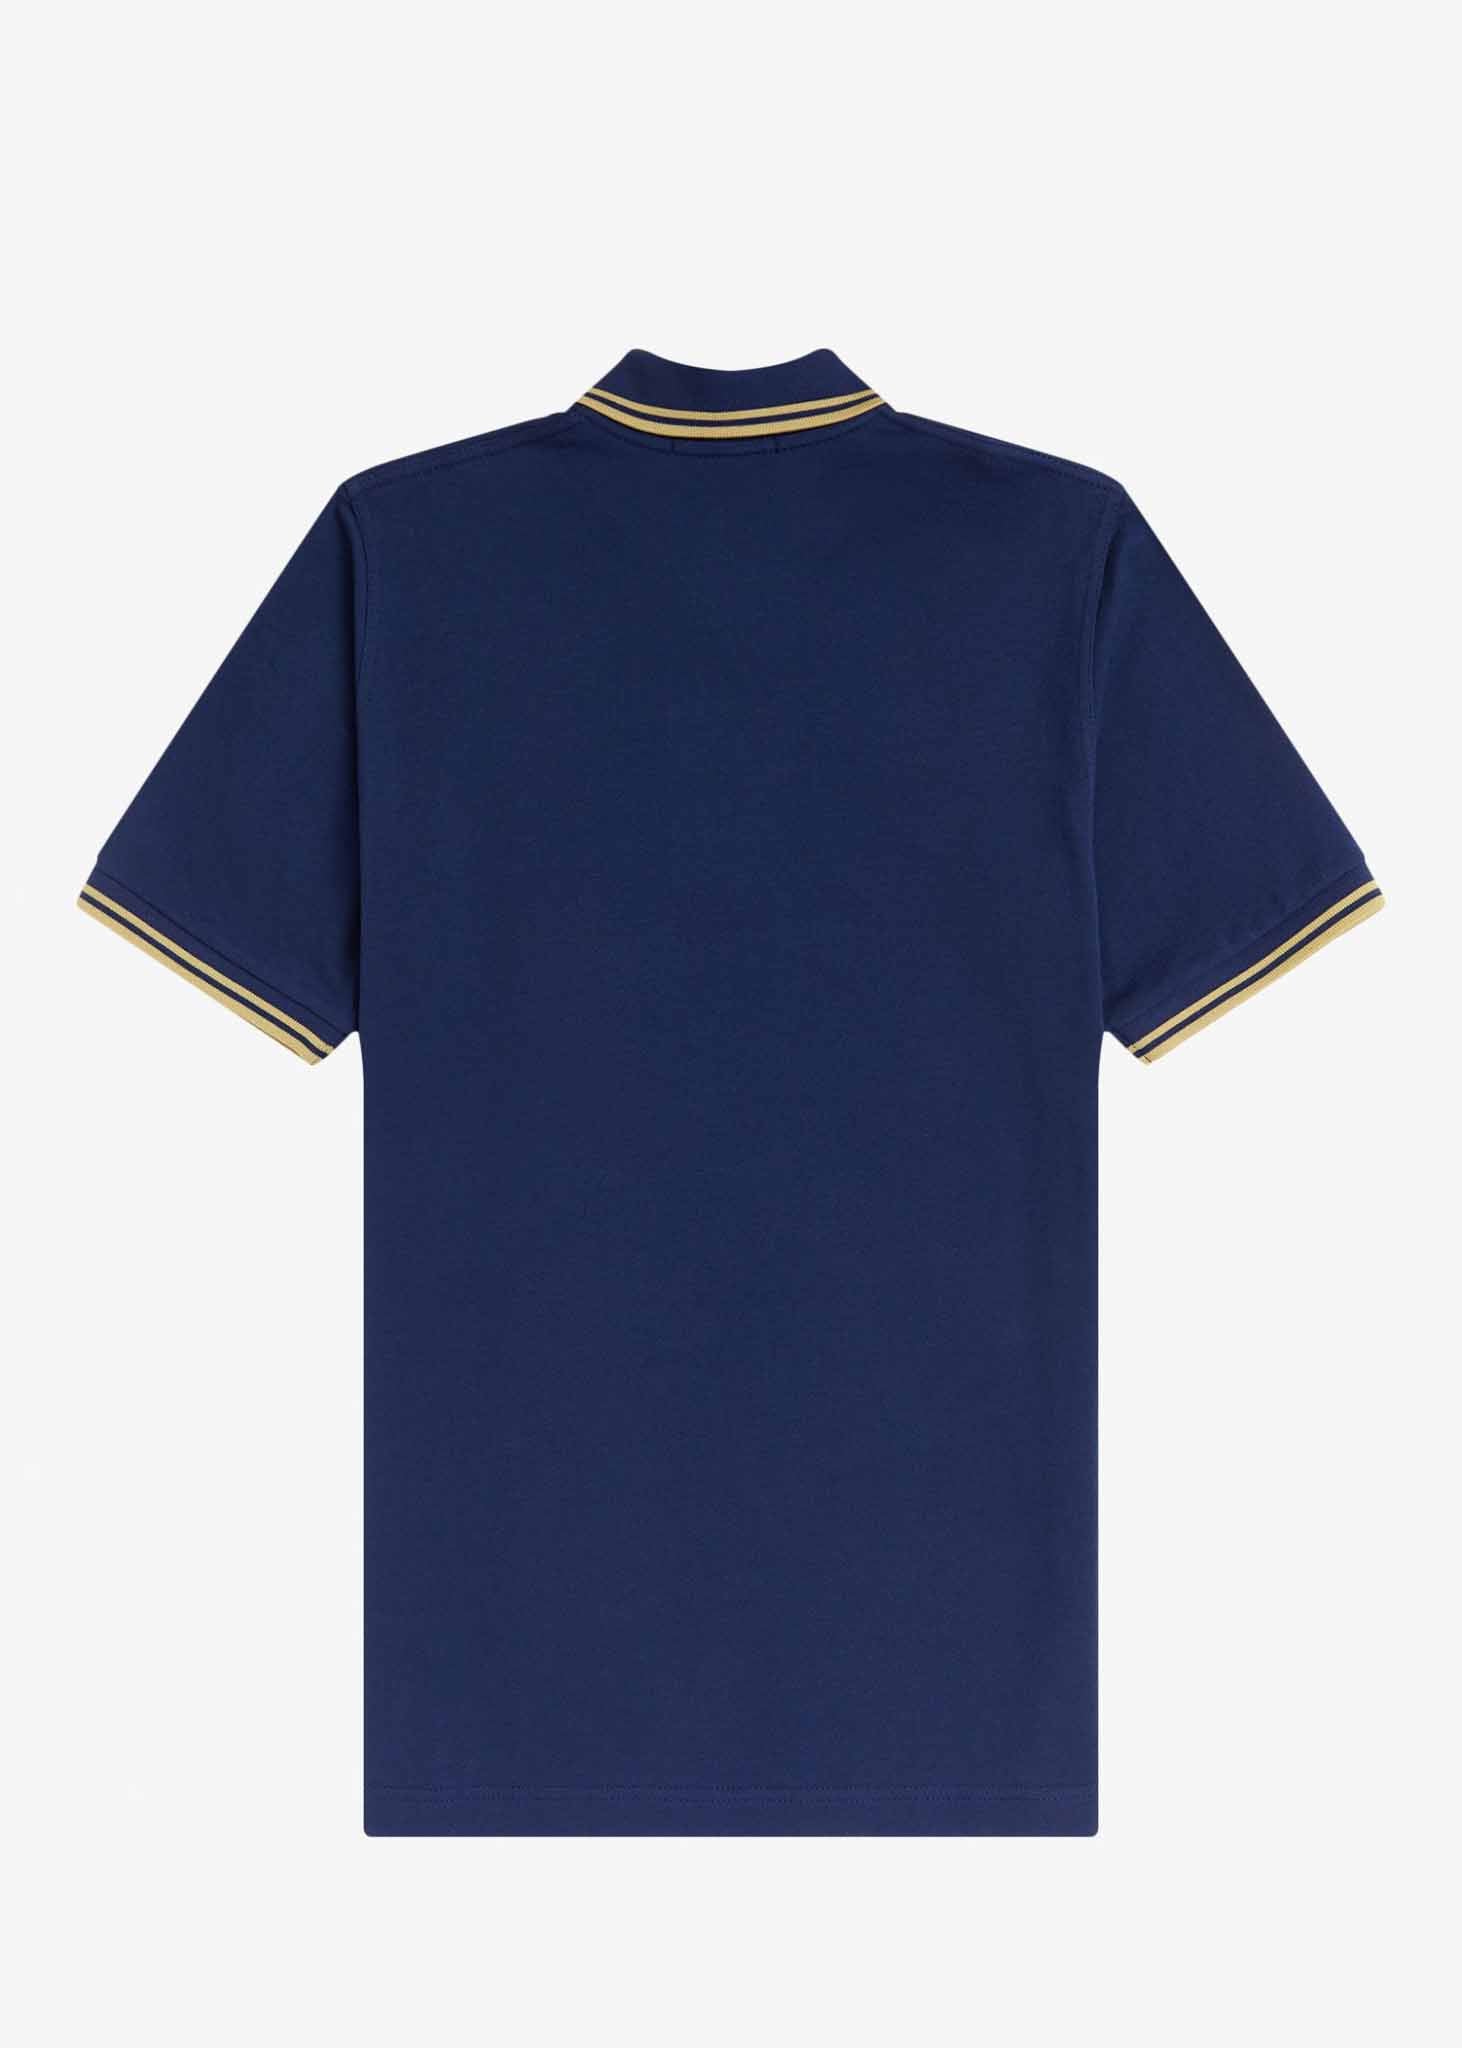 fred perry polo french navy gold